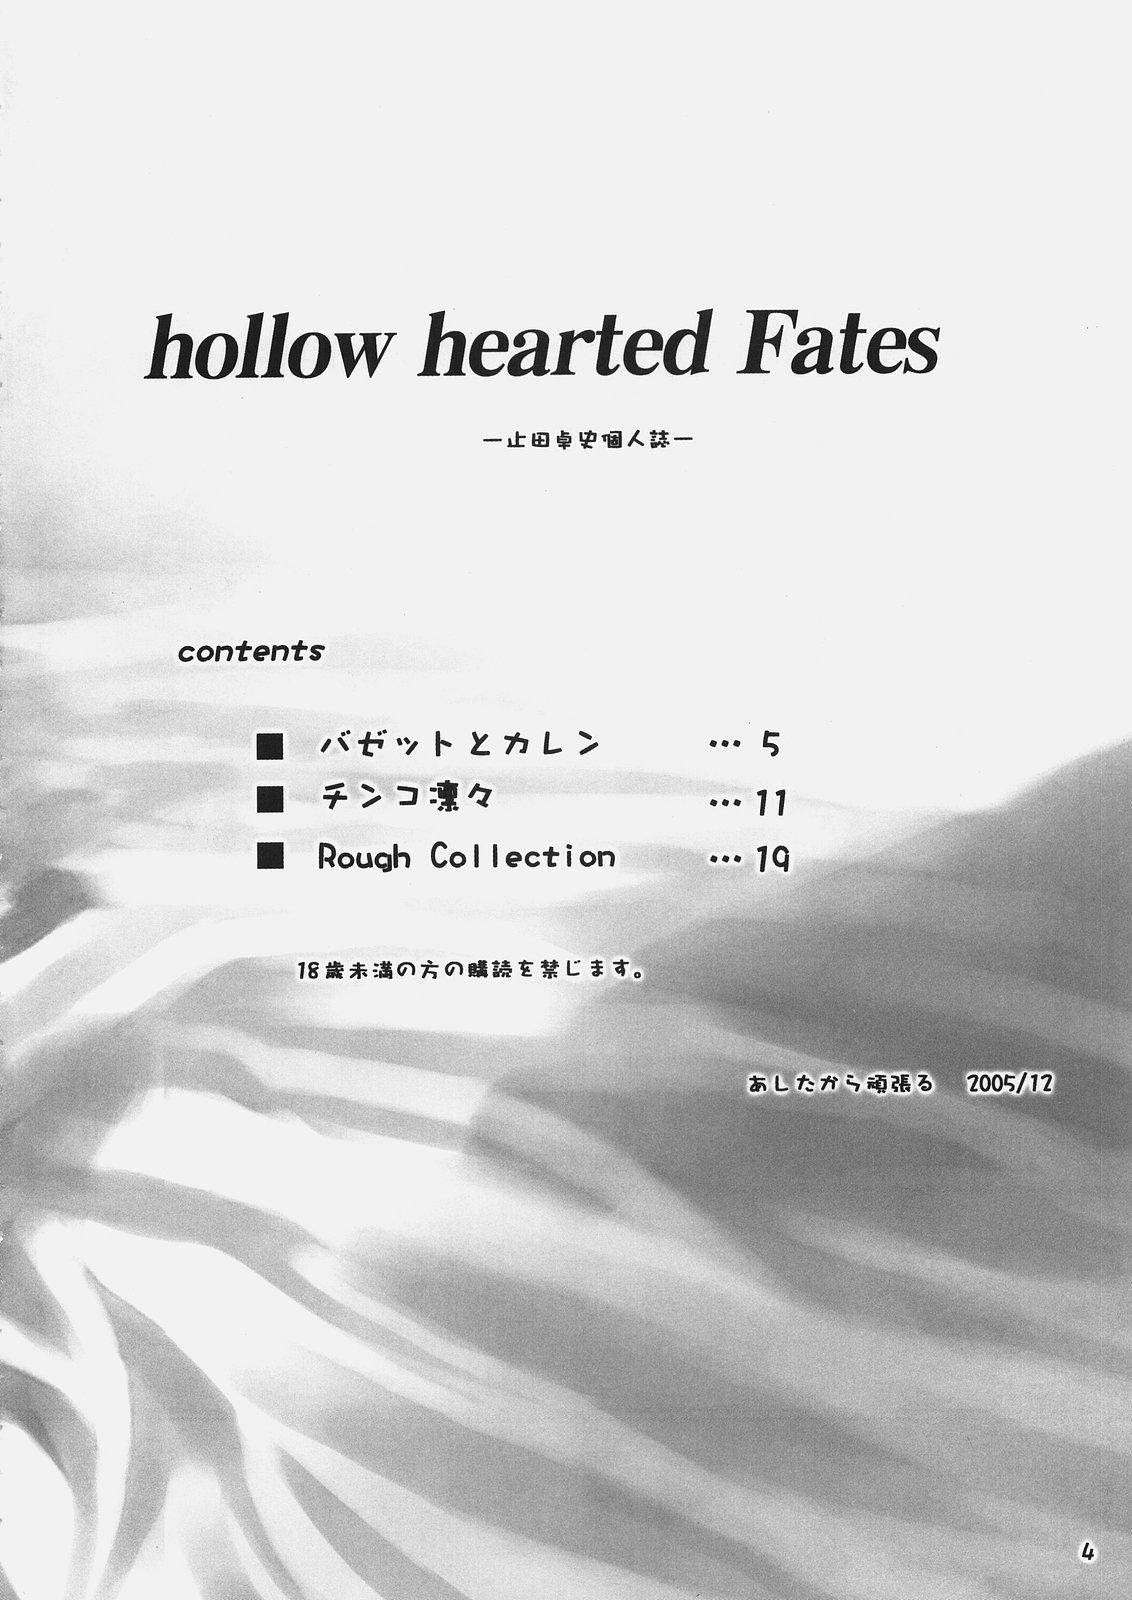 hollow hearted Fates 2